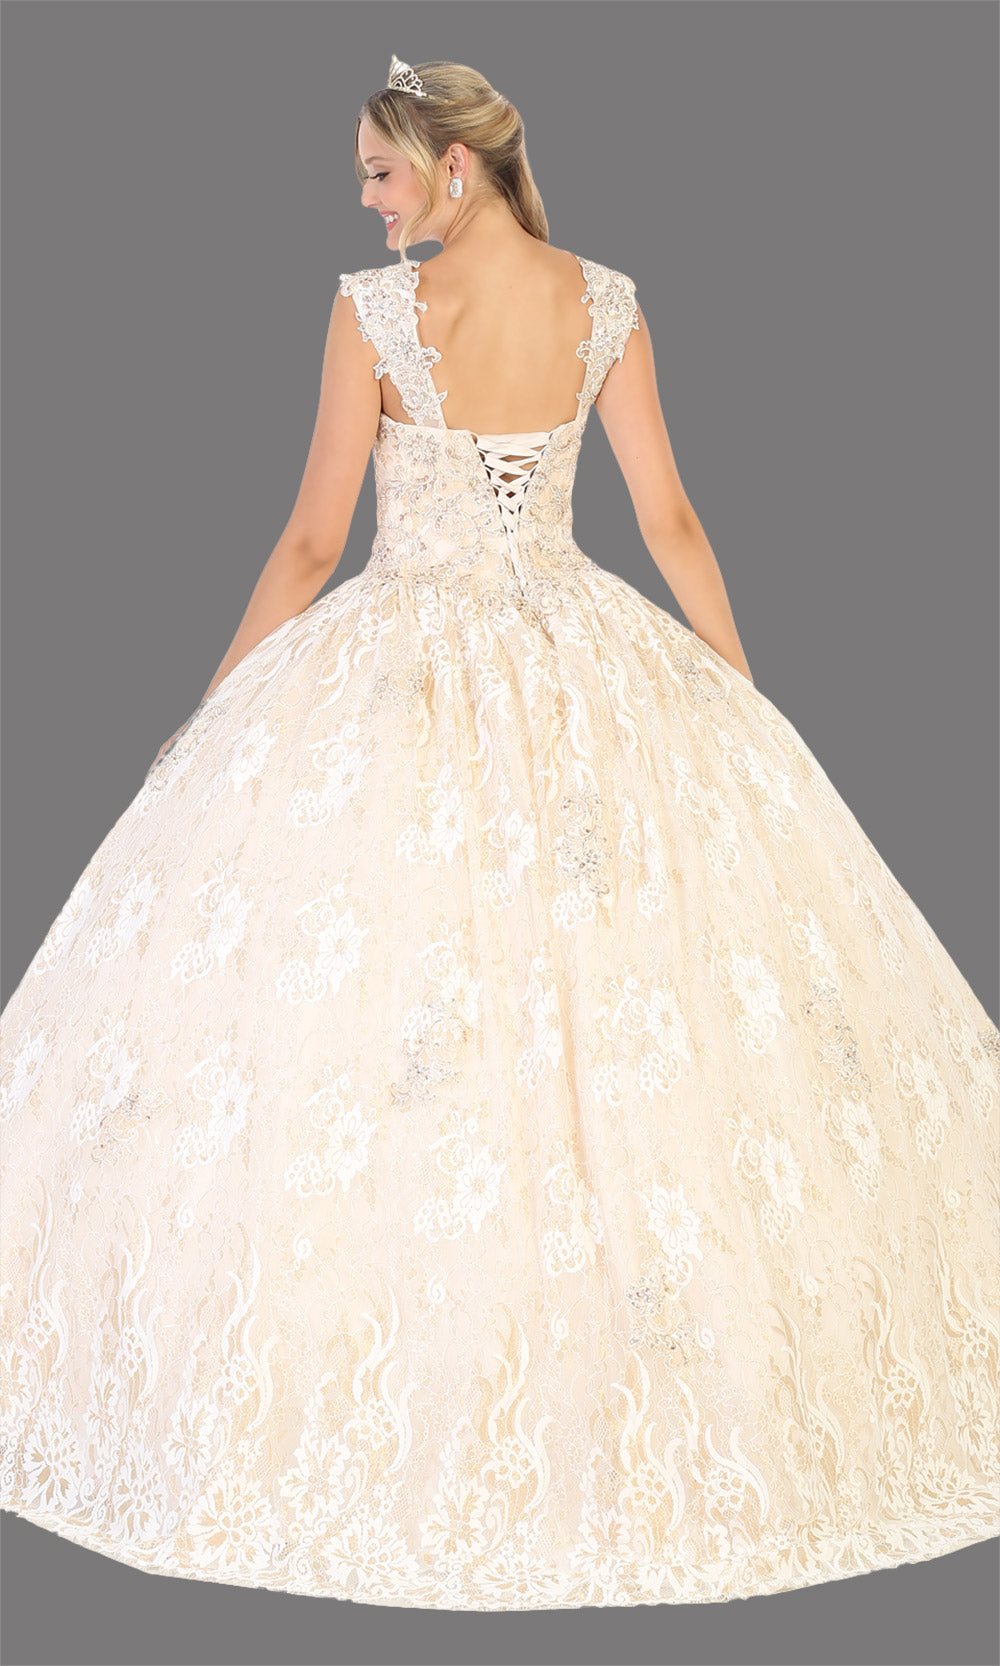 Mayqueen LK131 ivory gold quinceanera high neck ball gown w/sequin detail. Dark red ball gown is perfect for engagement dress, wedding reception, indowestern party gown, sweet 16, debut, sweet 15, sweet 18. Plus sizes available for ballgowns-back.jpg